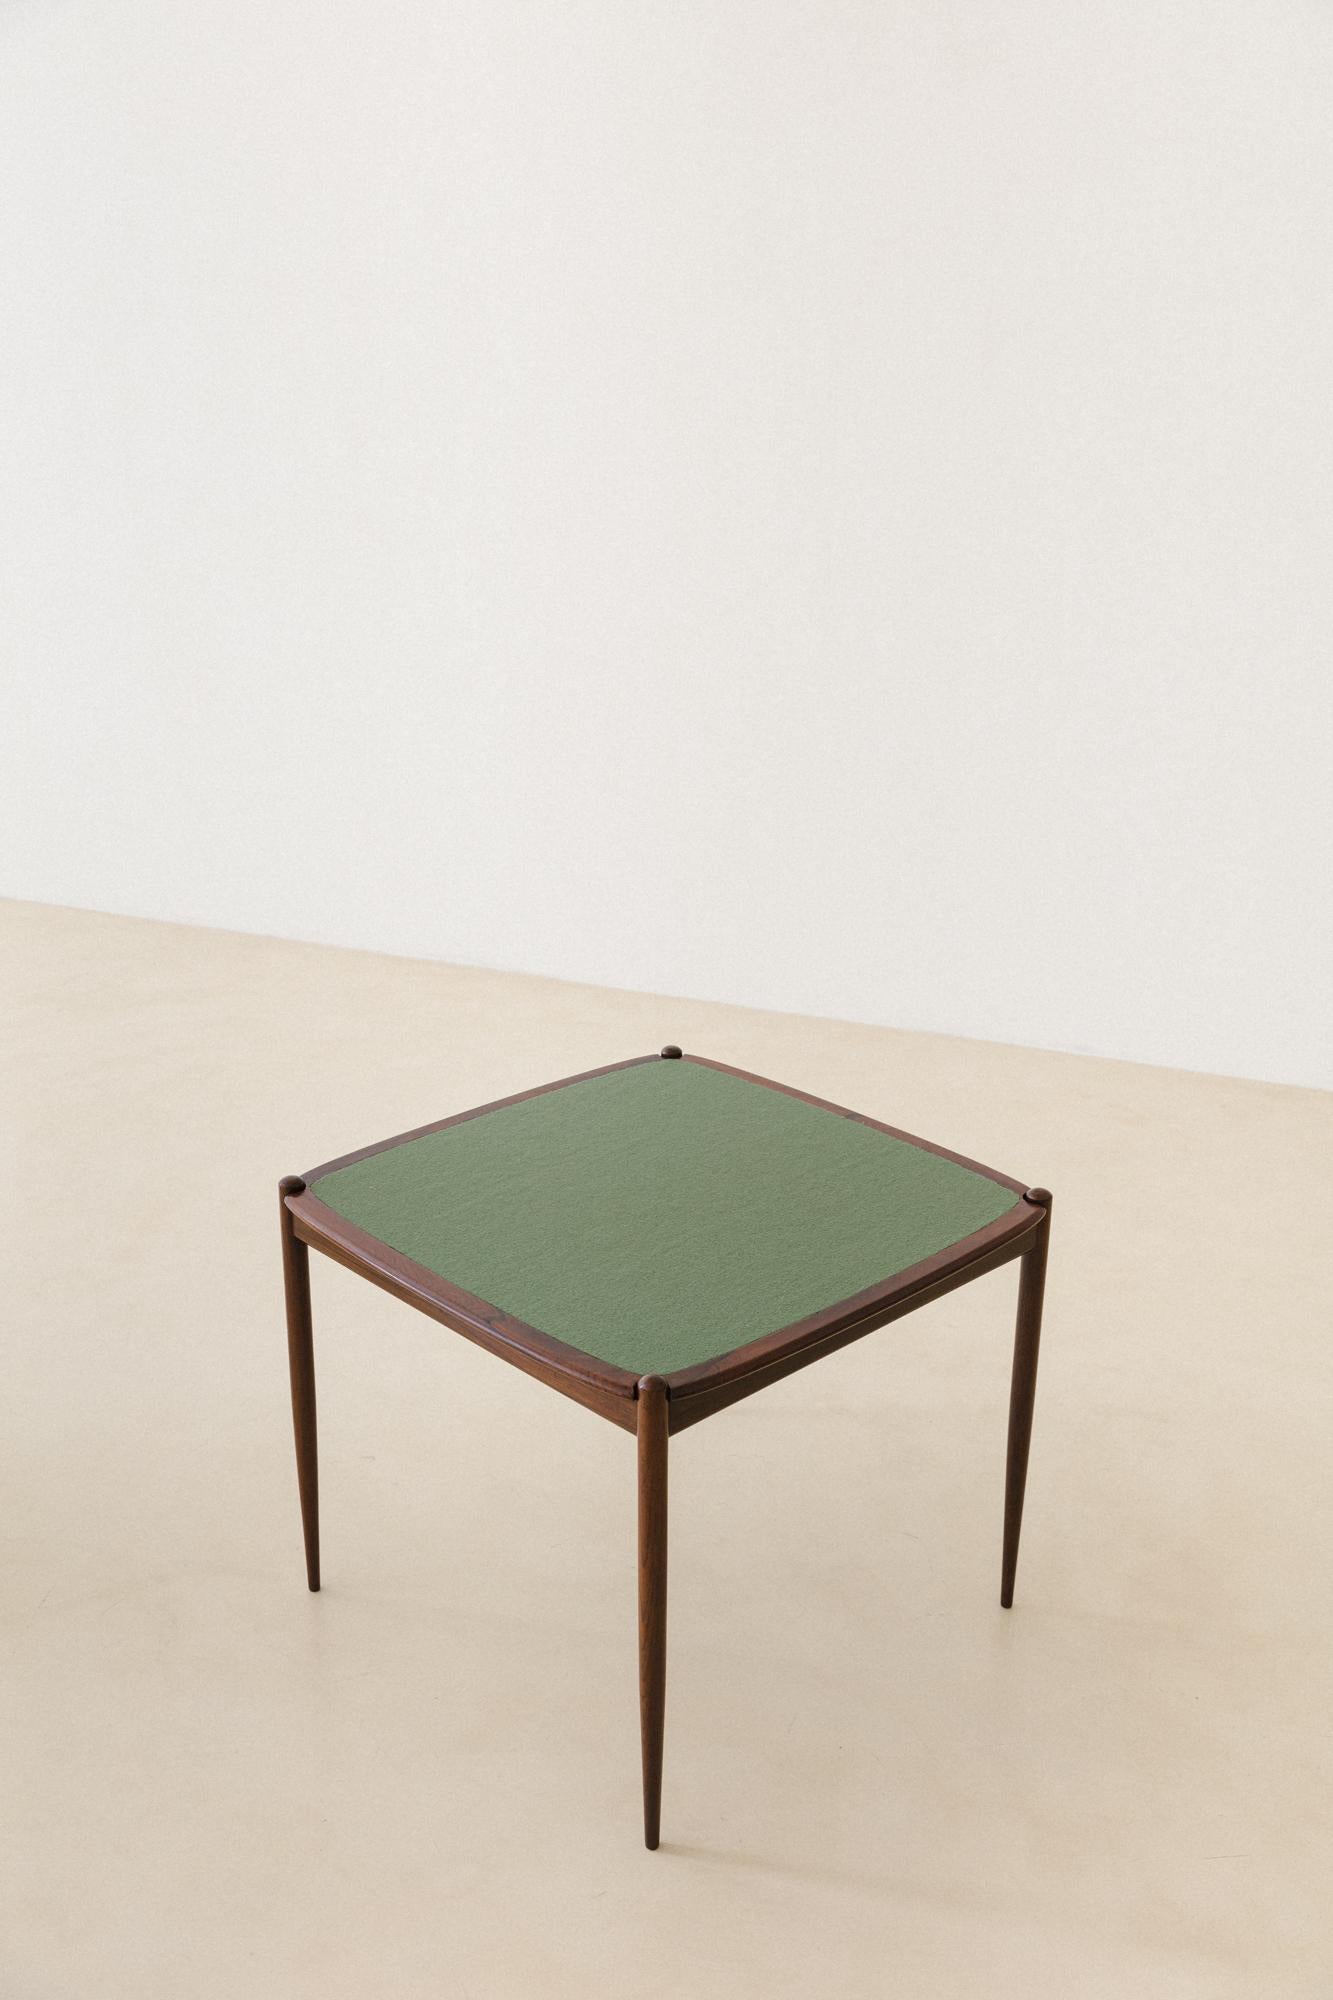 This game table was produced by the Brazilian Forma S.A. Móveis e Objetos de Arte in the 1950s. The piece is made of a Rosewood structure and the top can be used on both sides: one in rosewood veneers, and other covered in a gorgeous green